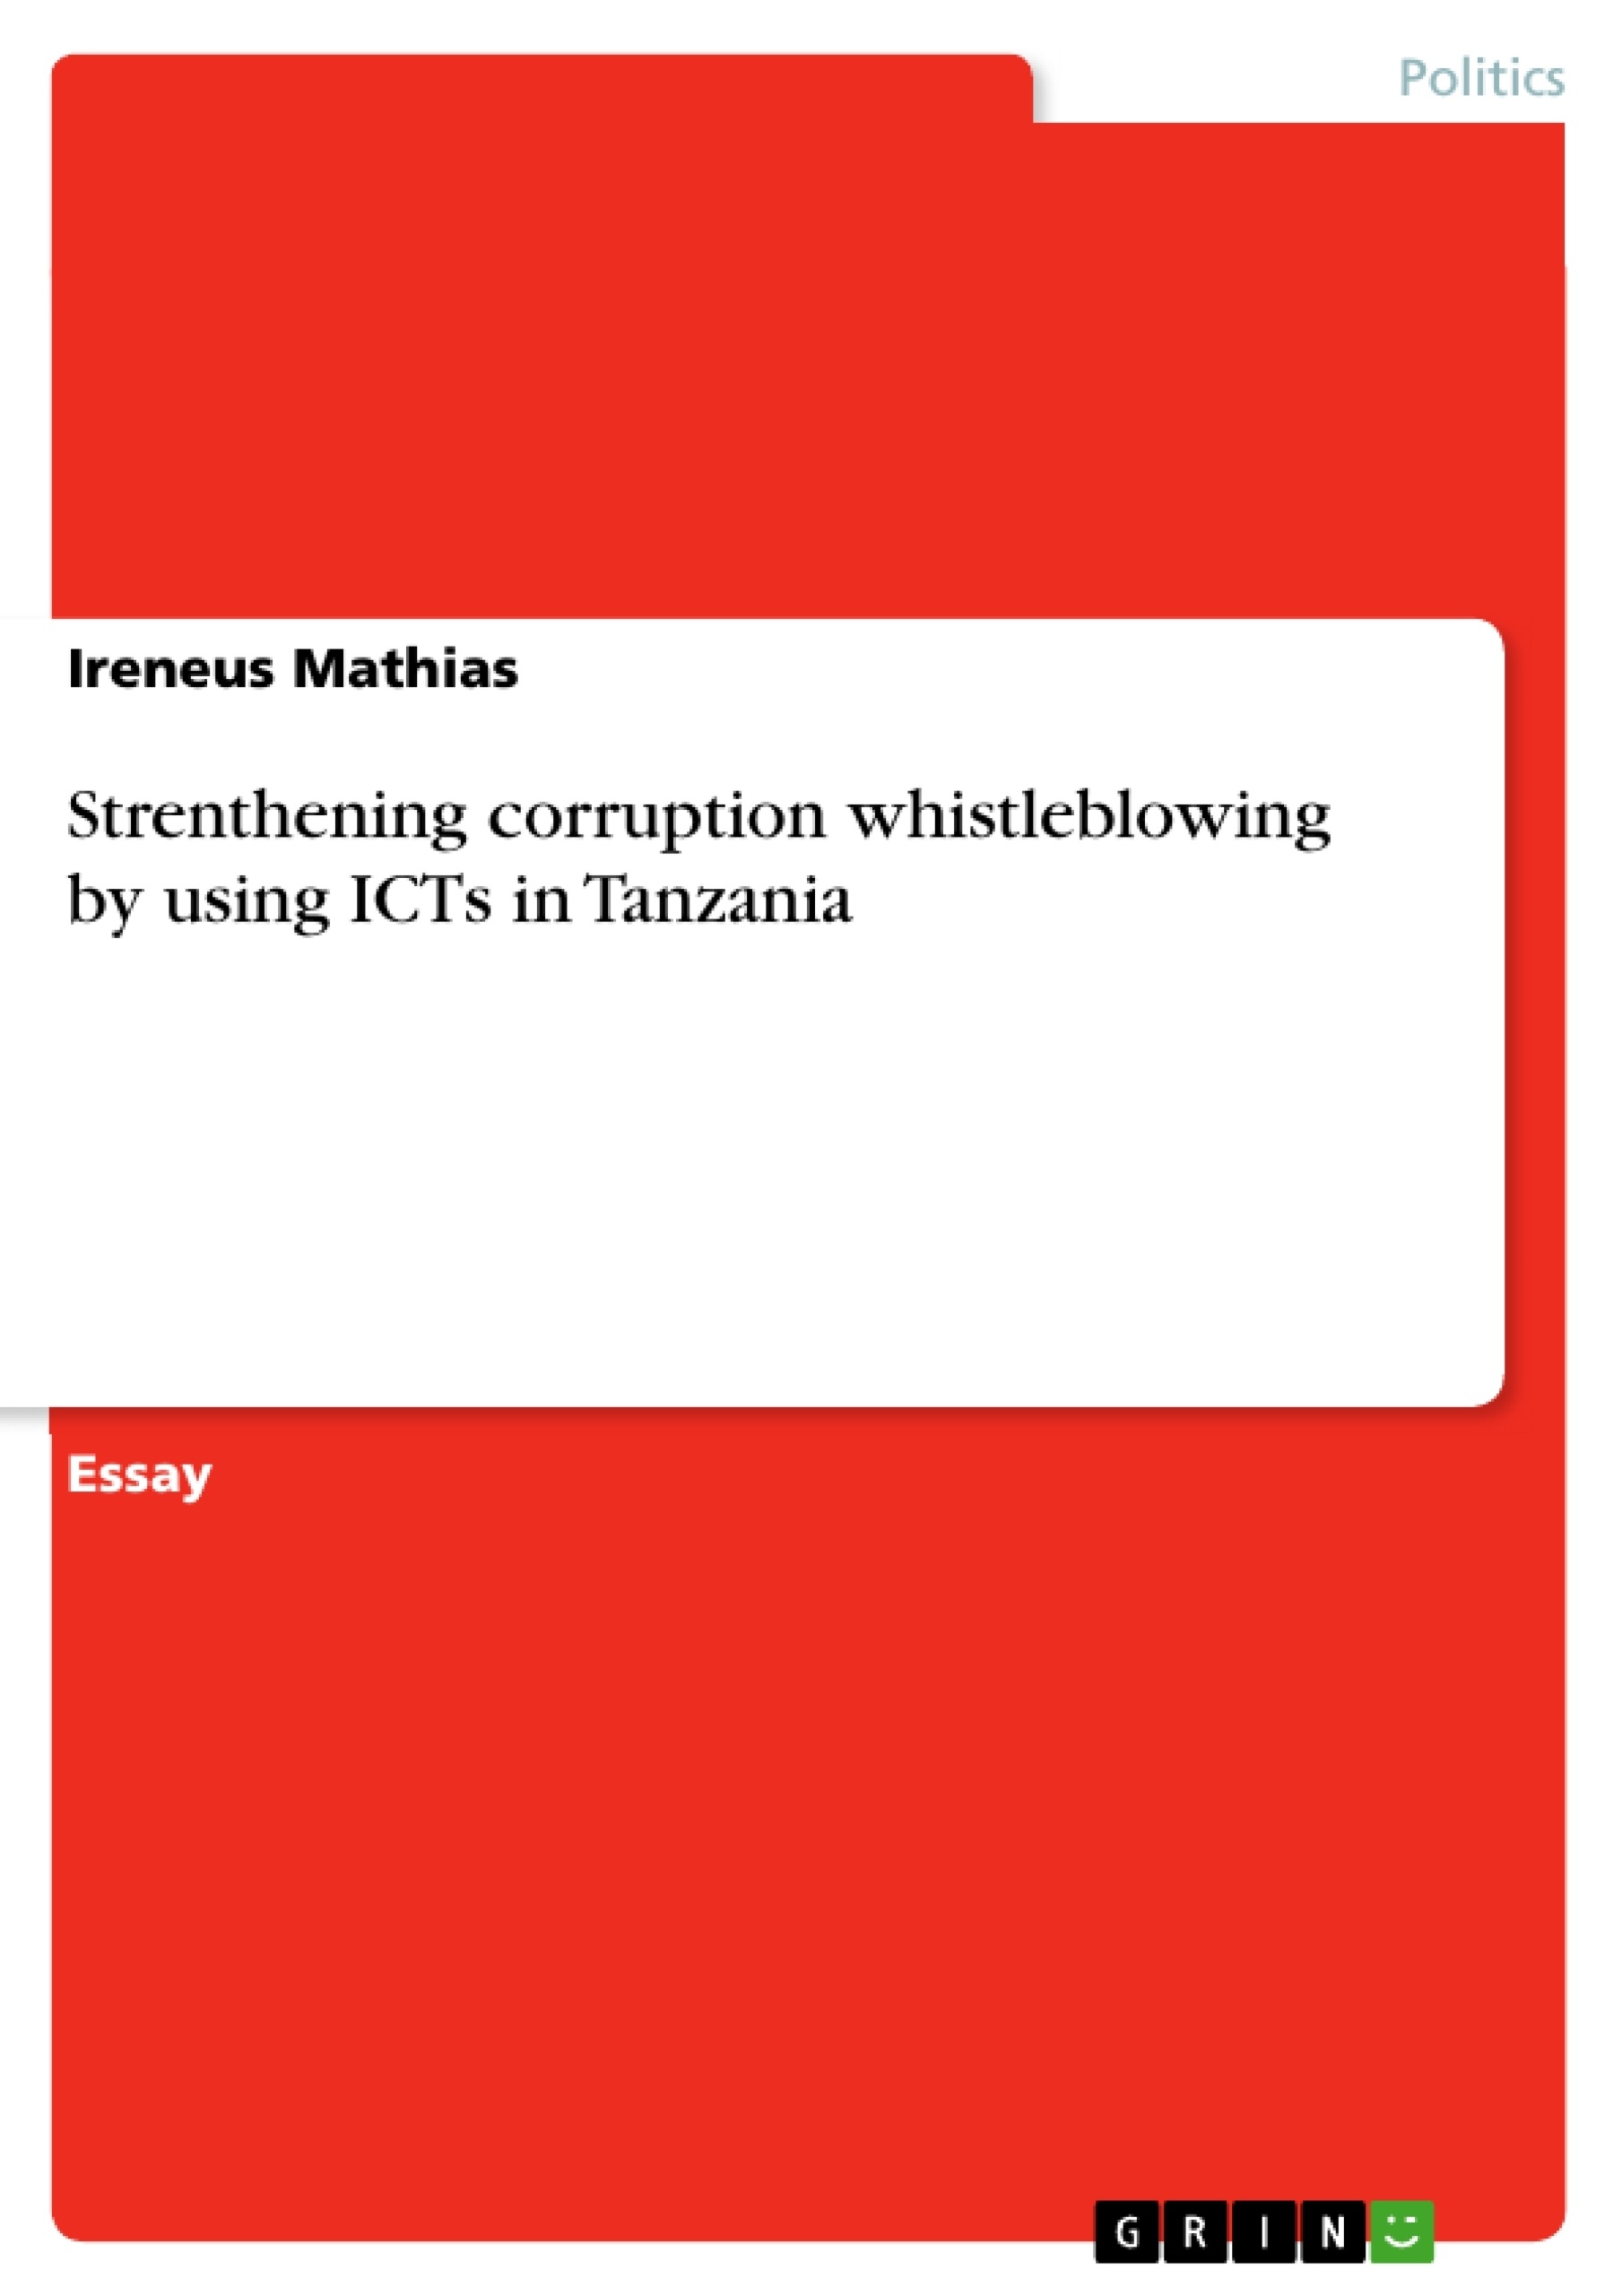 Titel: Strenthening corruption whistleblowing by using ICTs in Tanzania